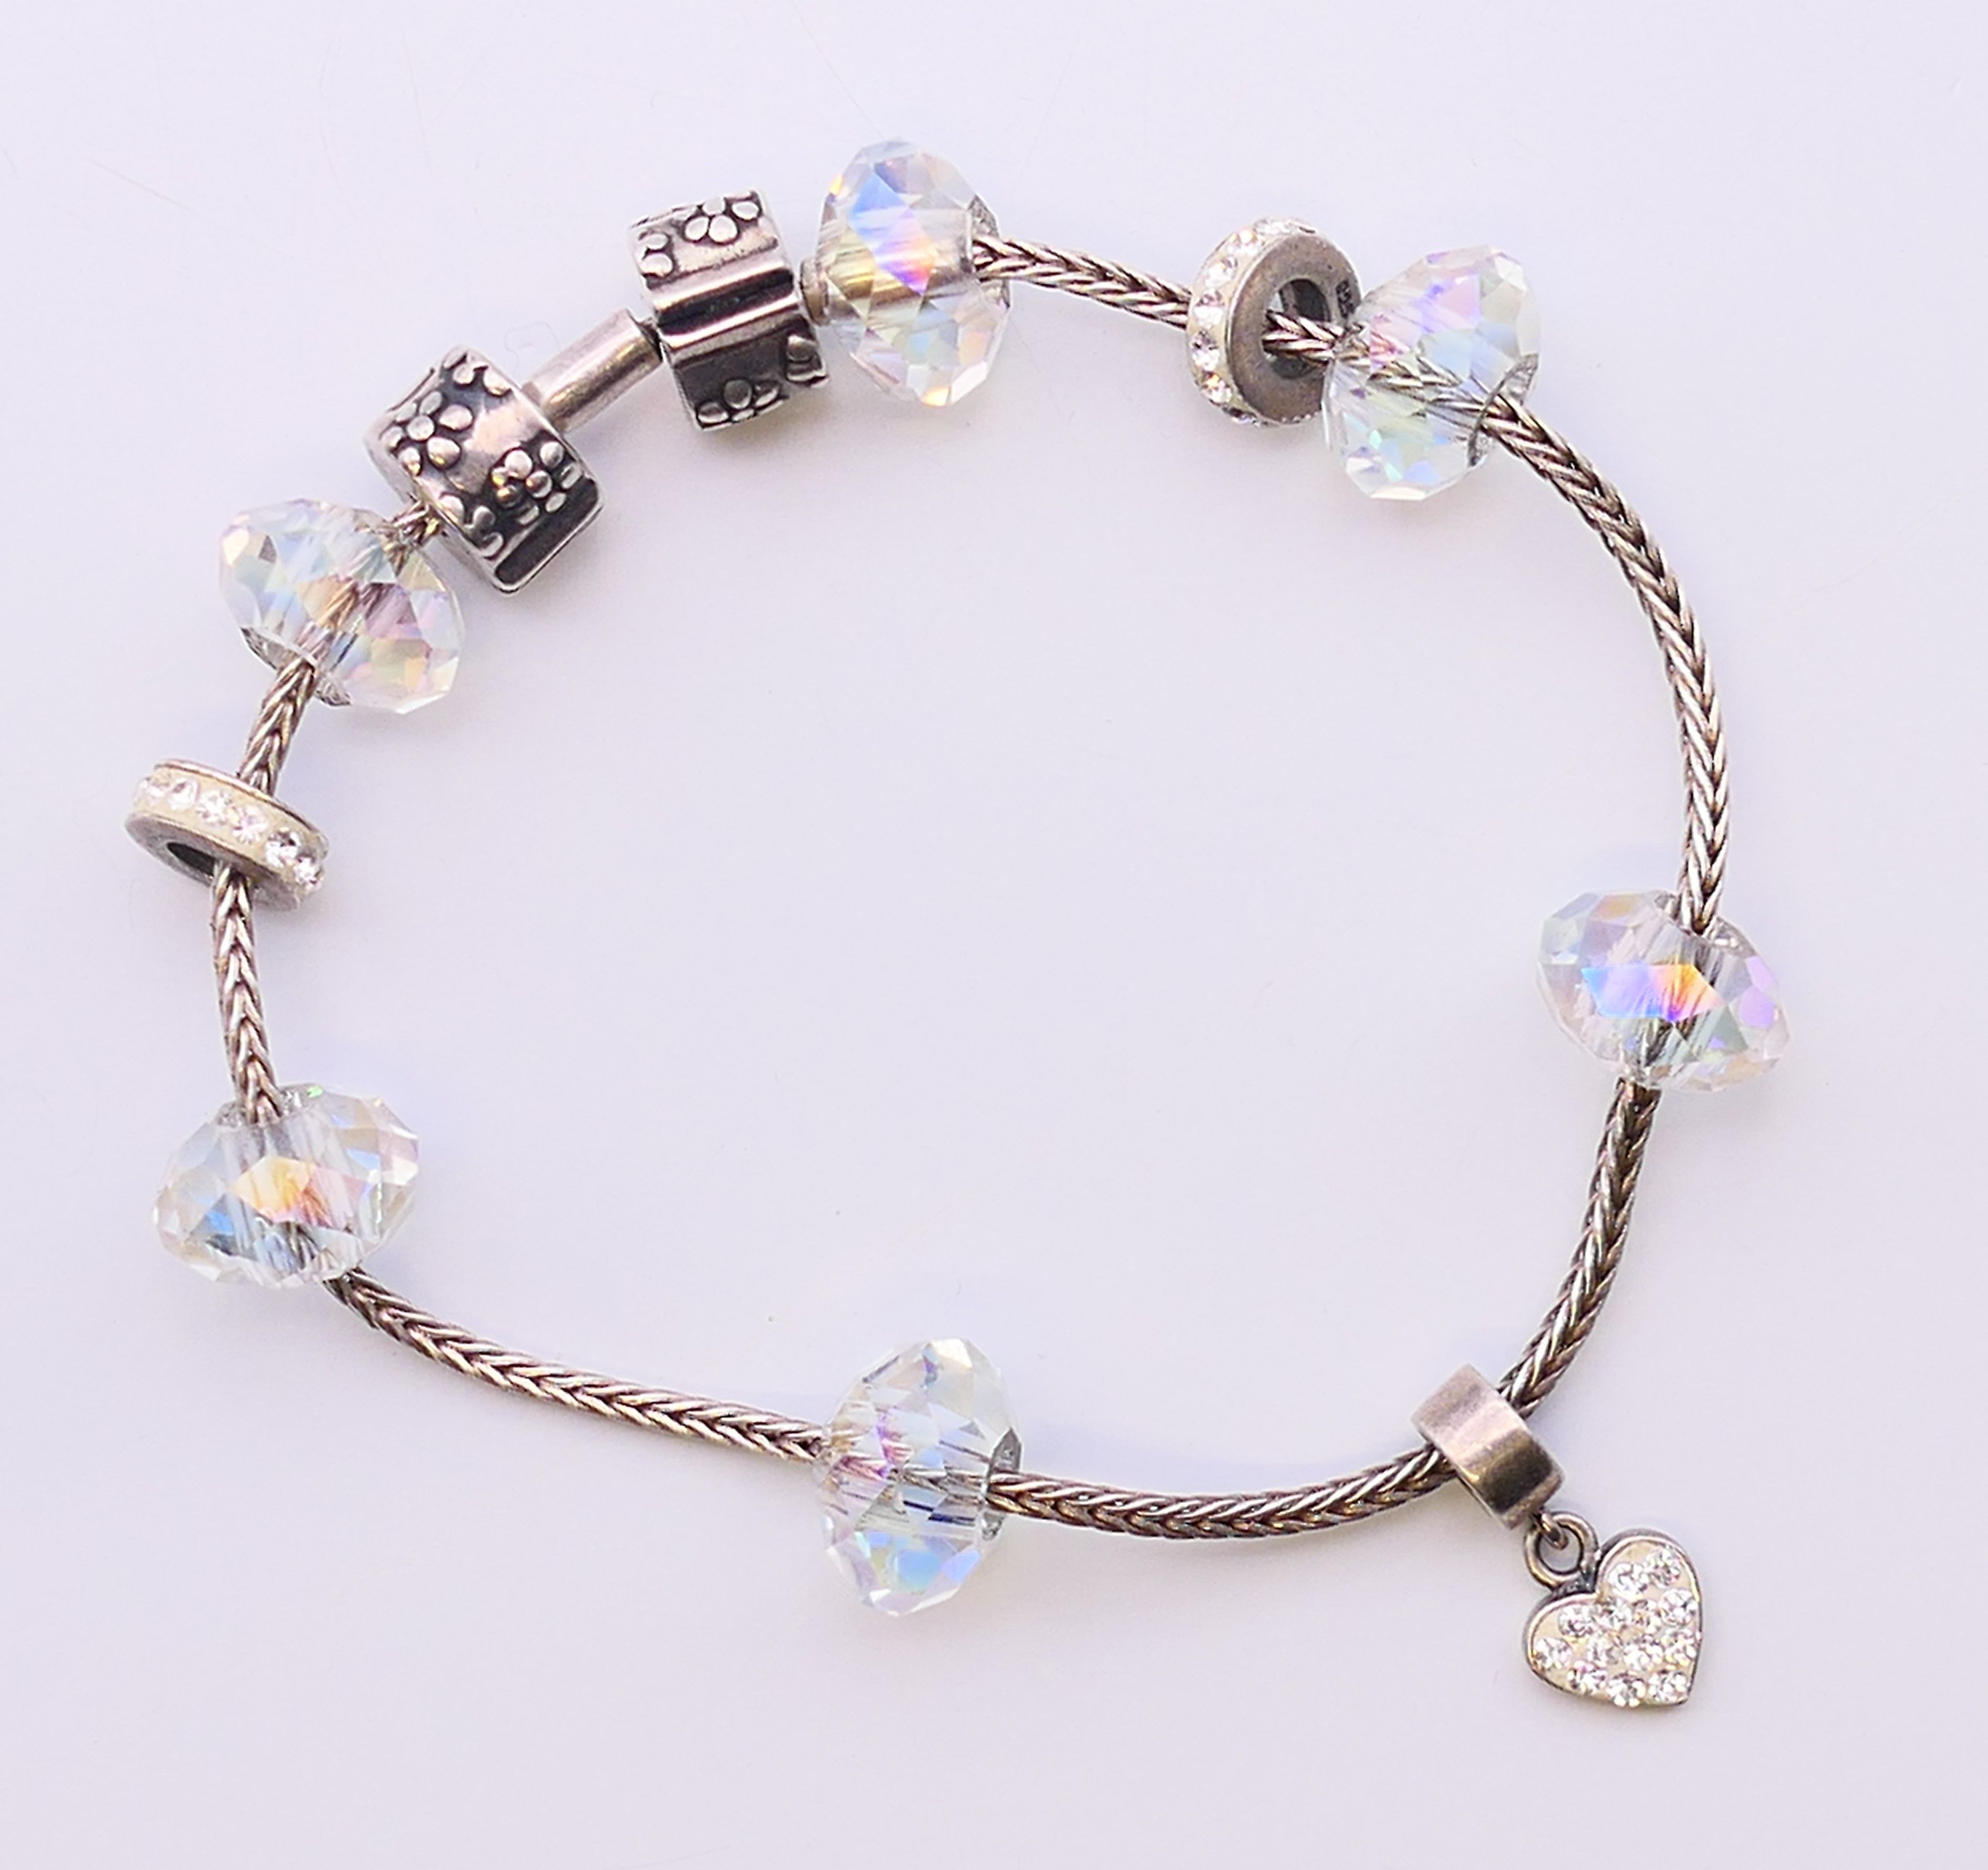 A silver bracelet with silver and bead charms. 17 cm long. - Image 3 of 5